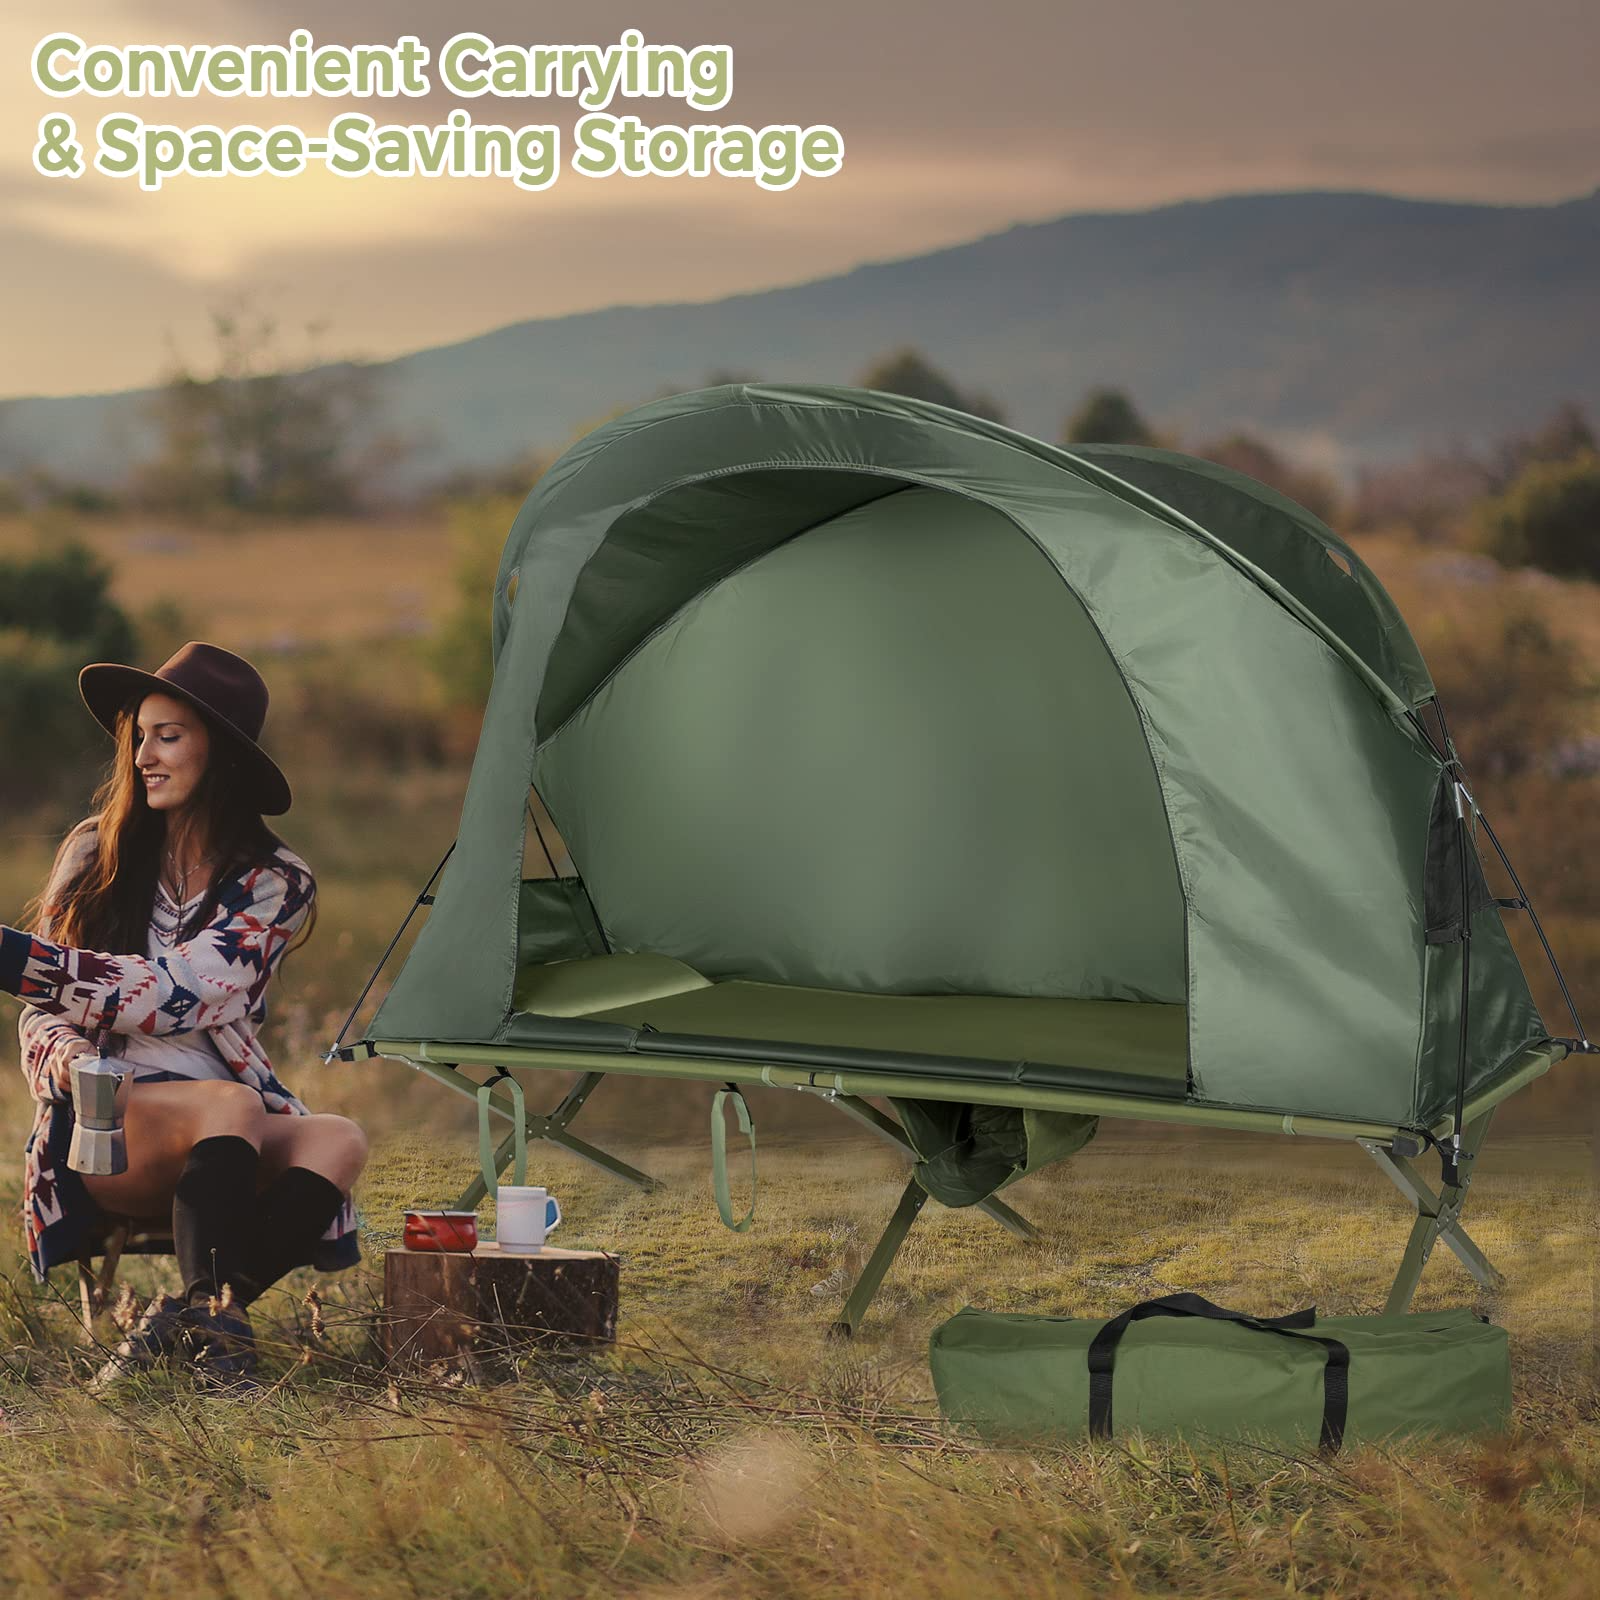 4-in-1 Camping Cot Tent for 1 Person, Foldable Elevated Tent Set